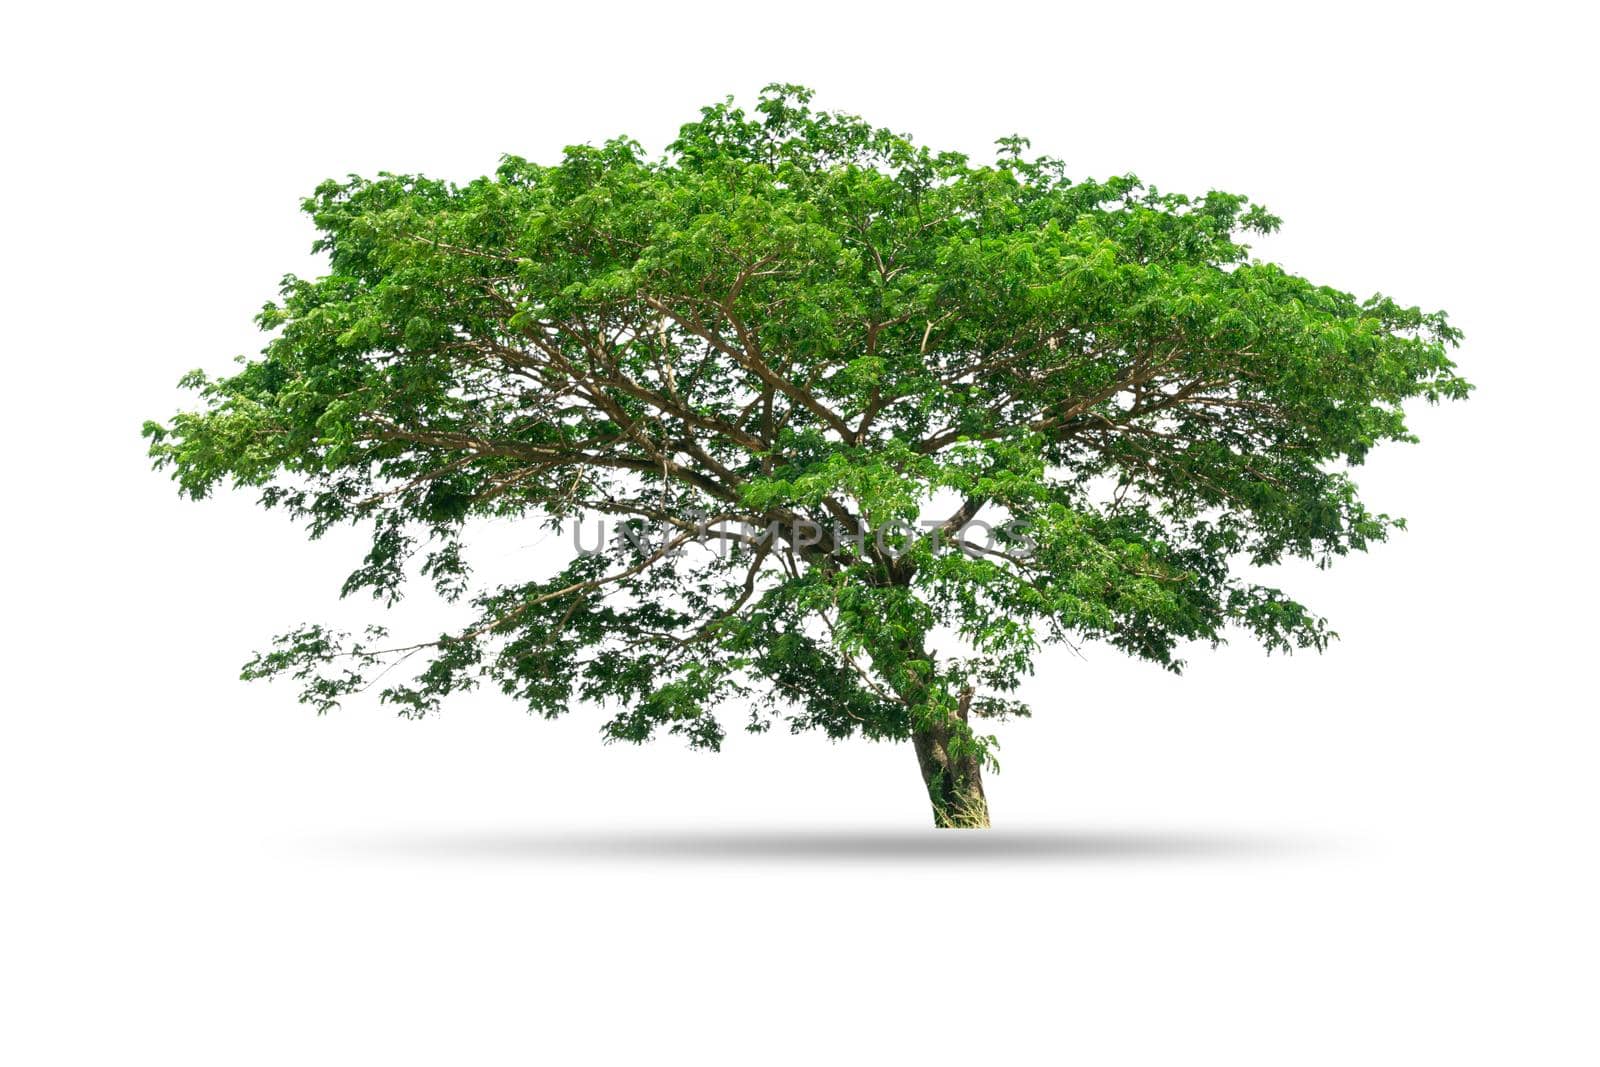 Tree isolated on white background by wattanaphob